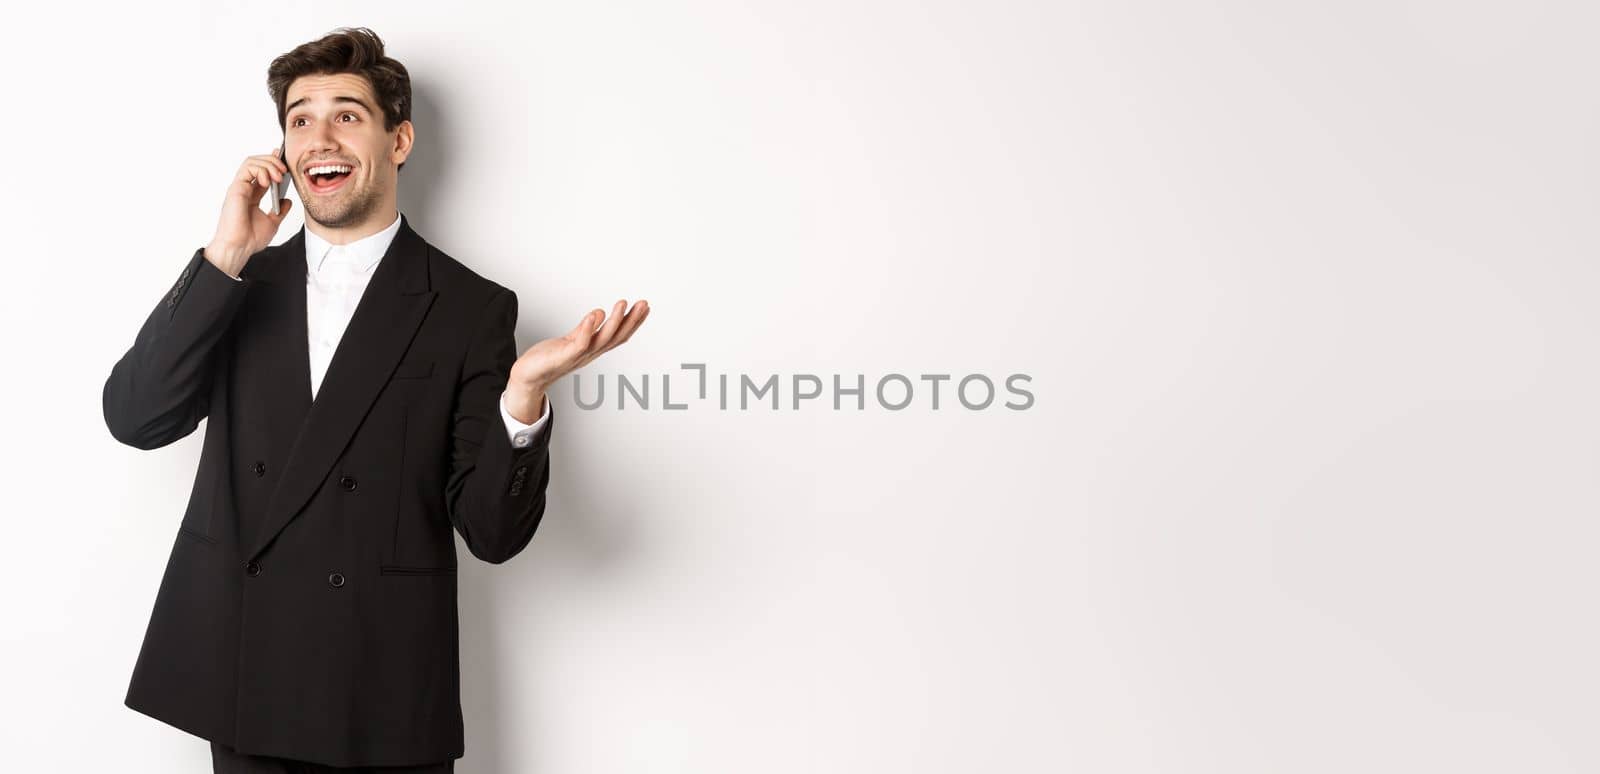 Portrait of happy good-looking businessman receiving great offer, talking on phone and looking pleased, standing in black suit against white background.